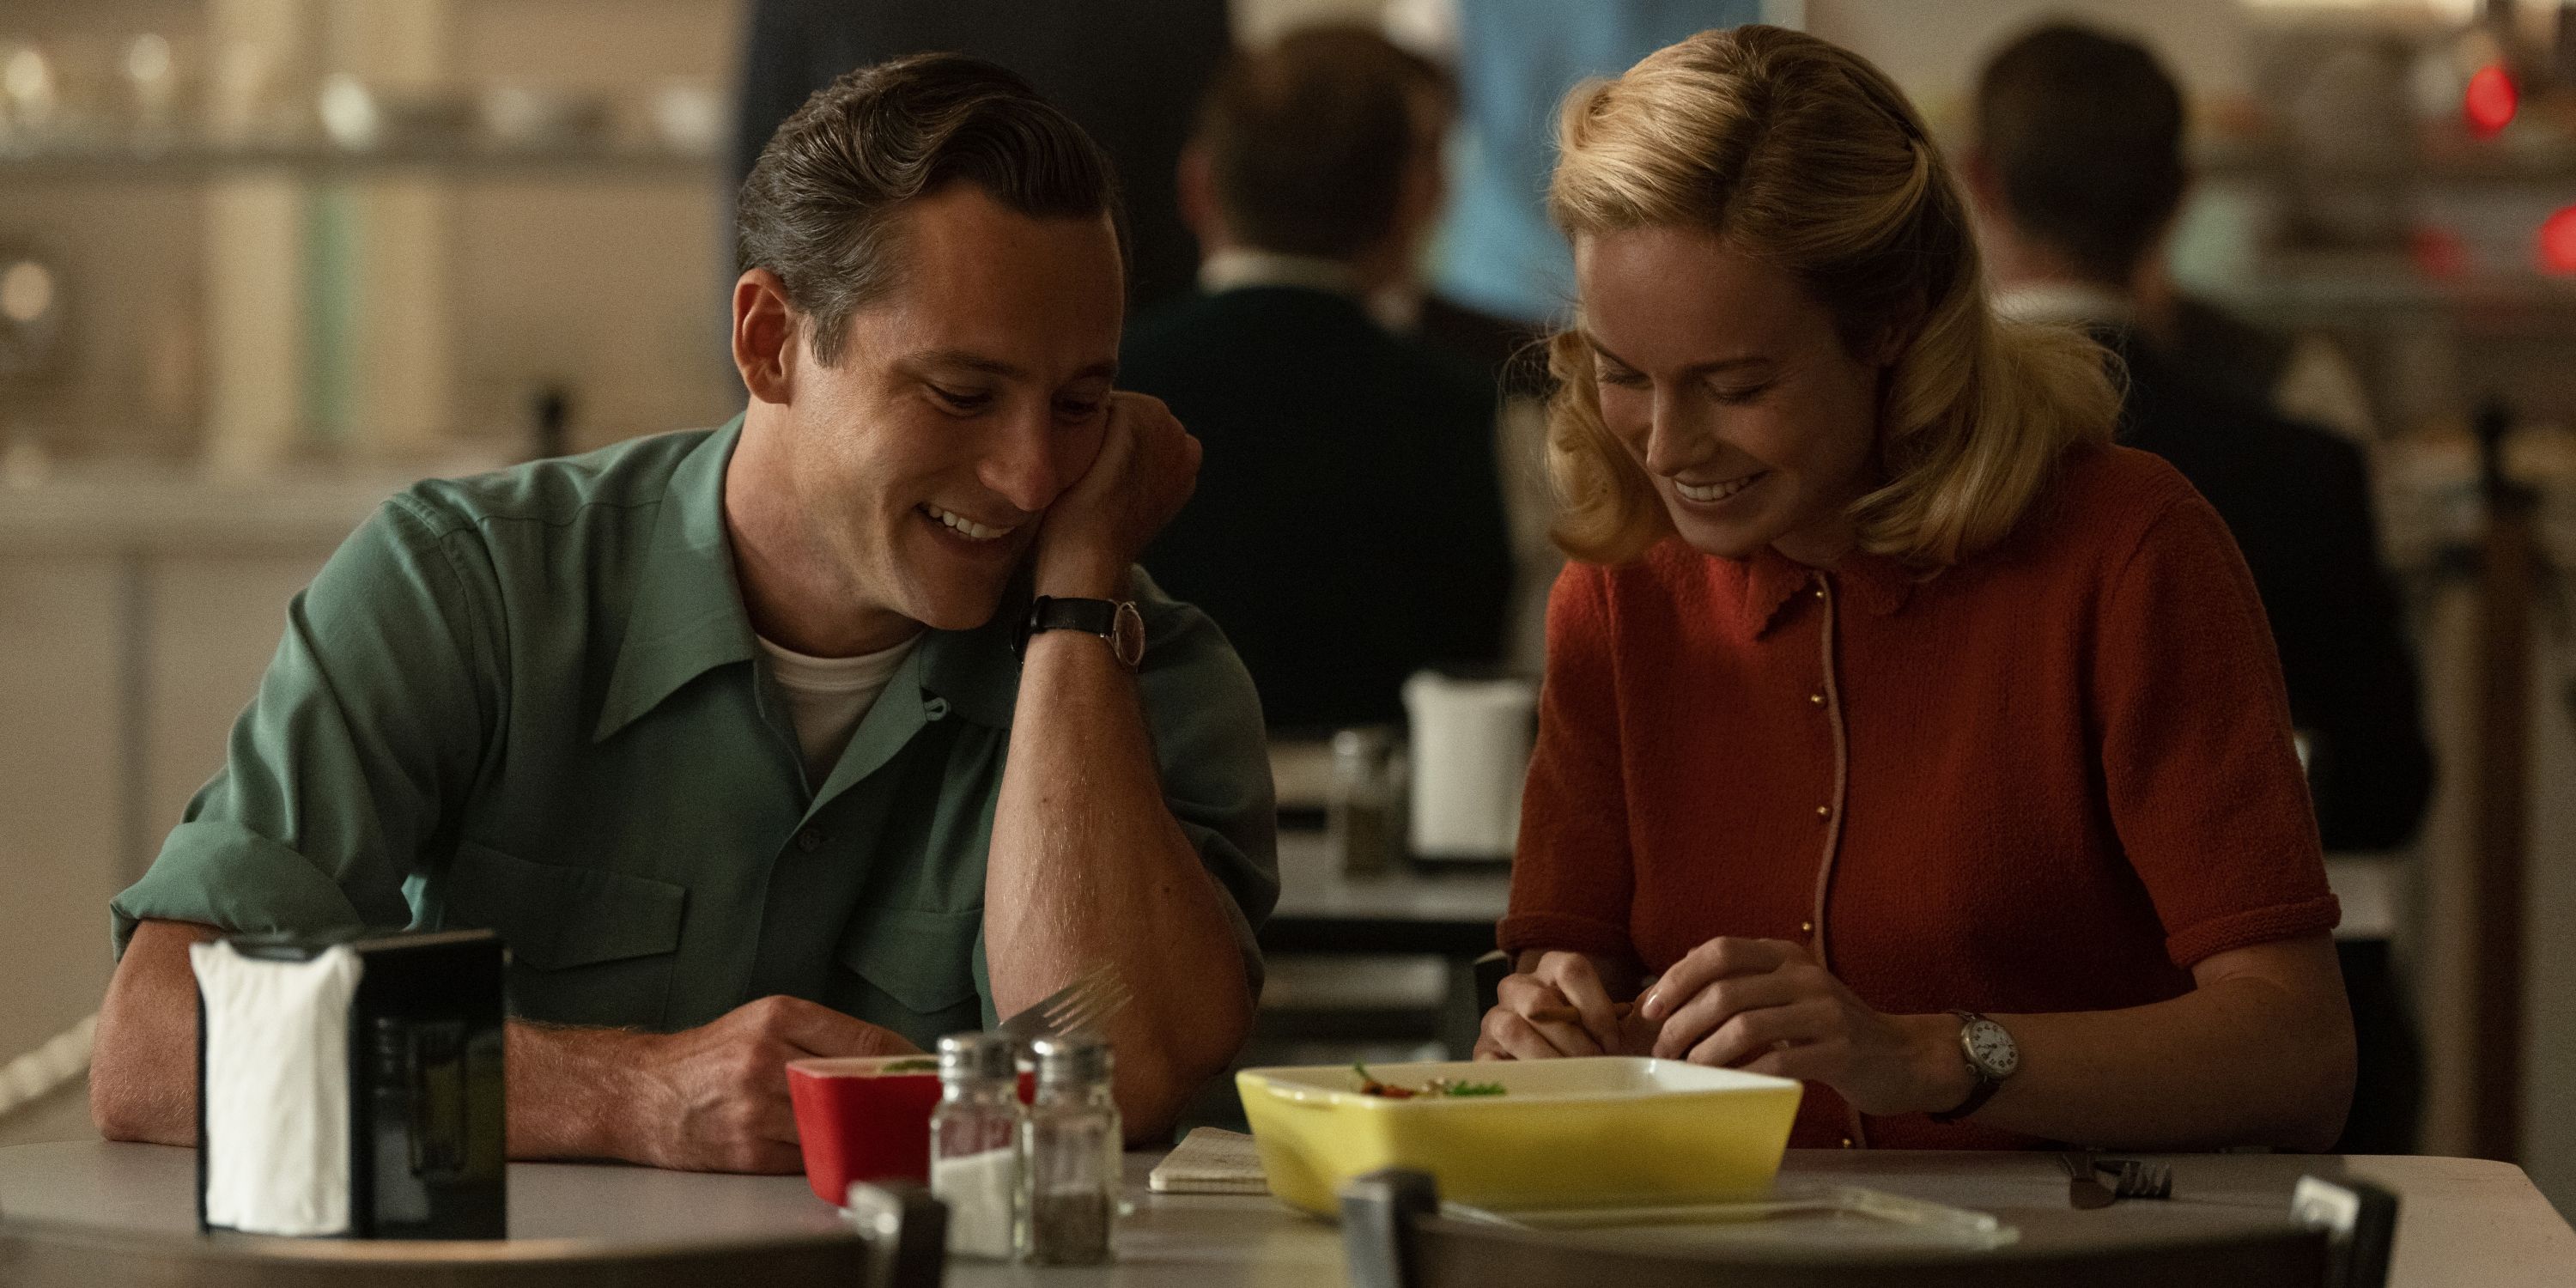 Brie Larson as Elizabeth Zott and Lewis Pullman as Calvin Evans in Episode 1 of Lessons in Chemistry